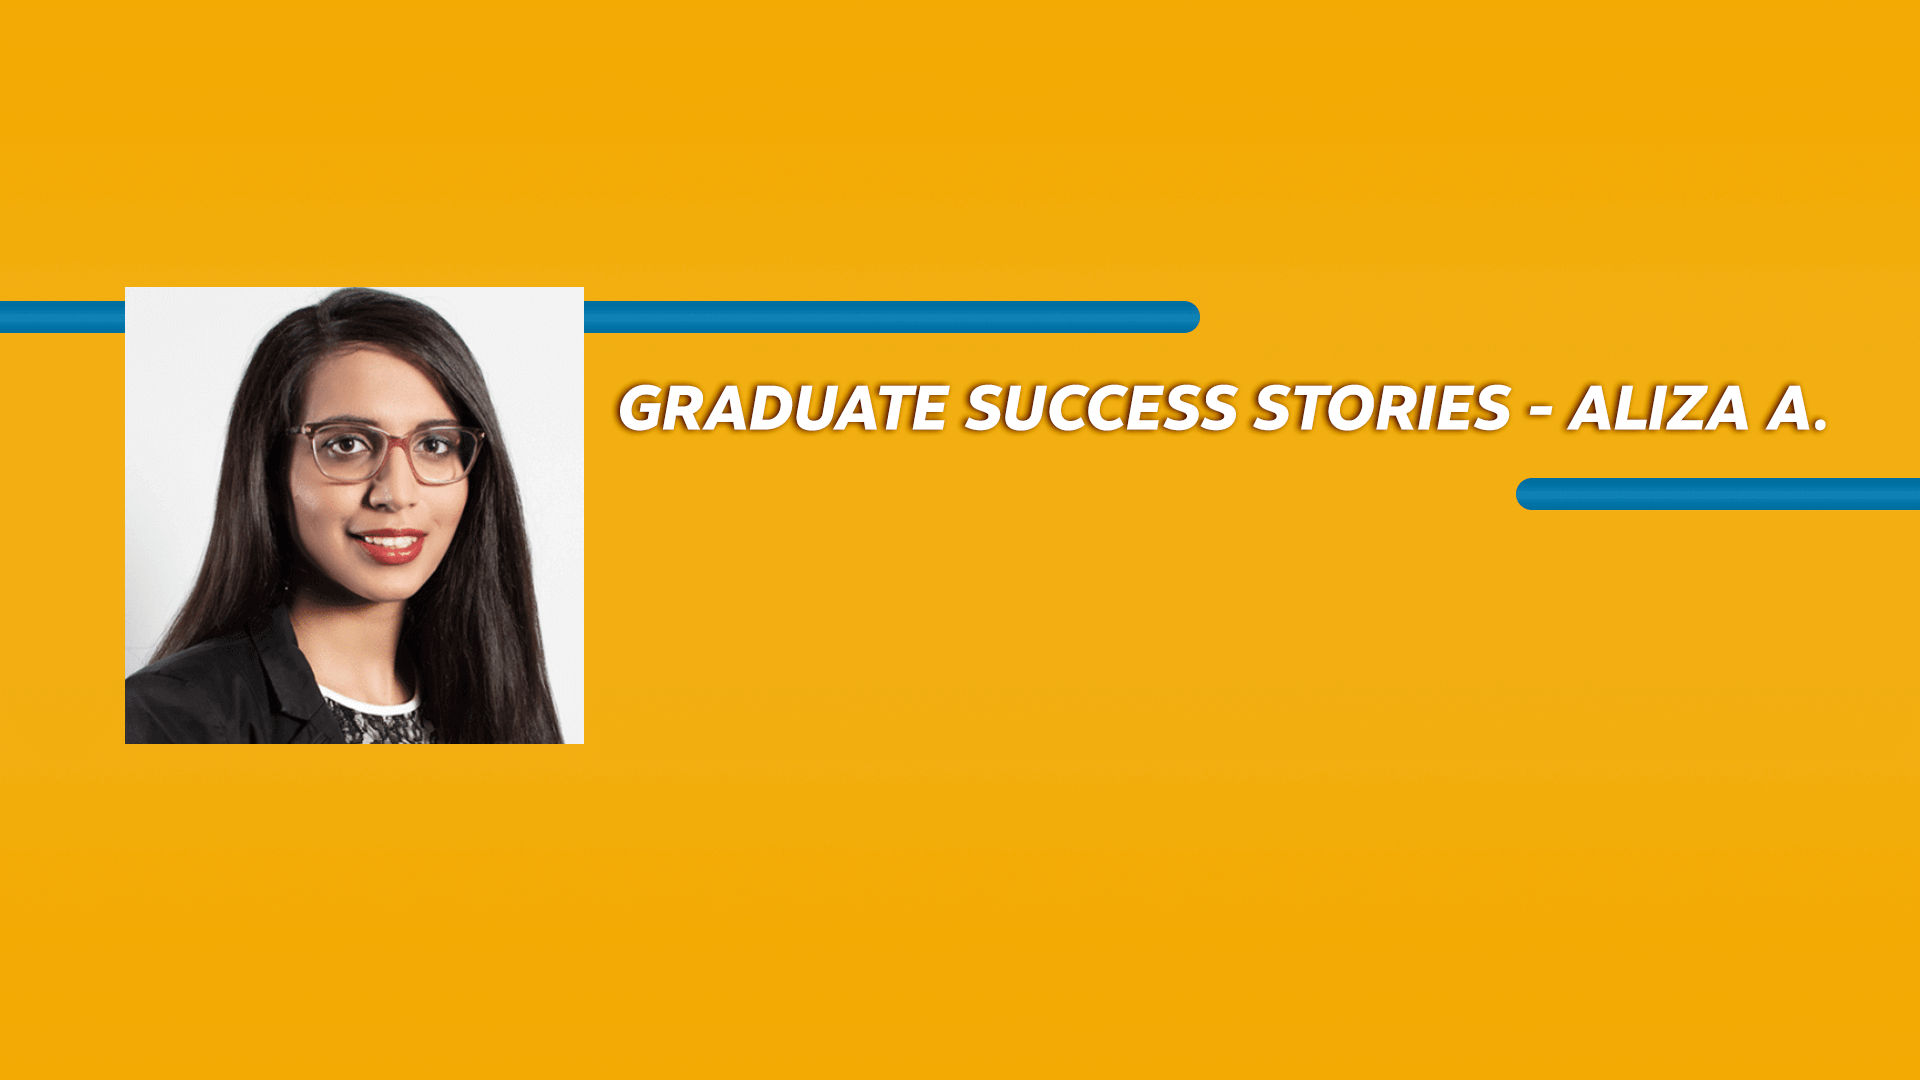 Orange rectangle with a picture of a woman and Graduate Success Stories - Aliza A. text in white font